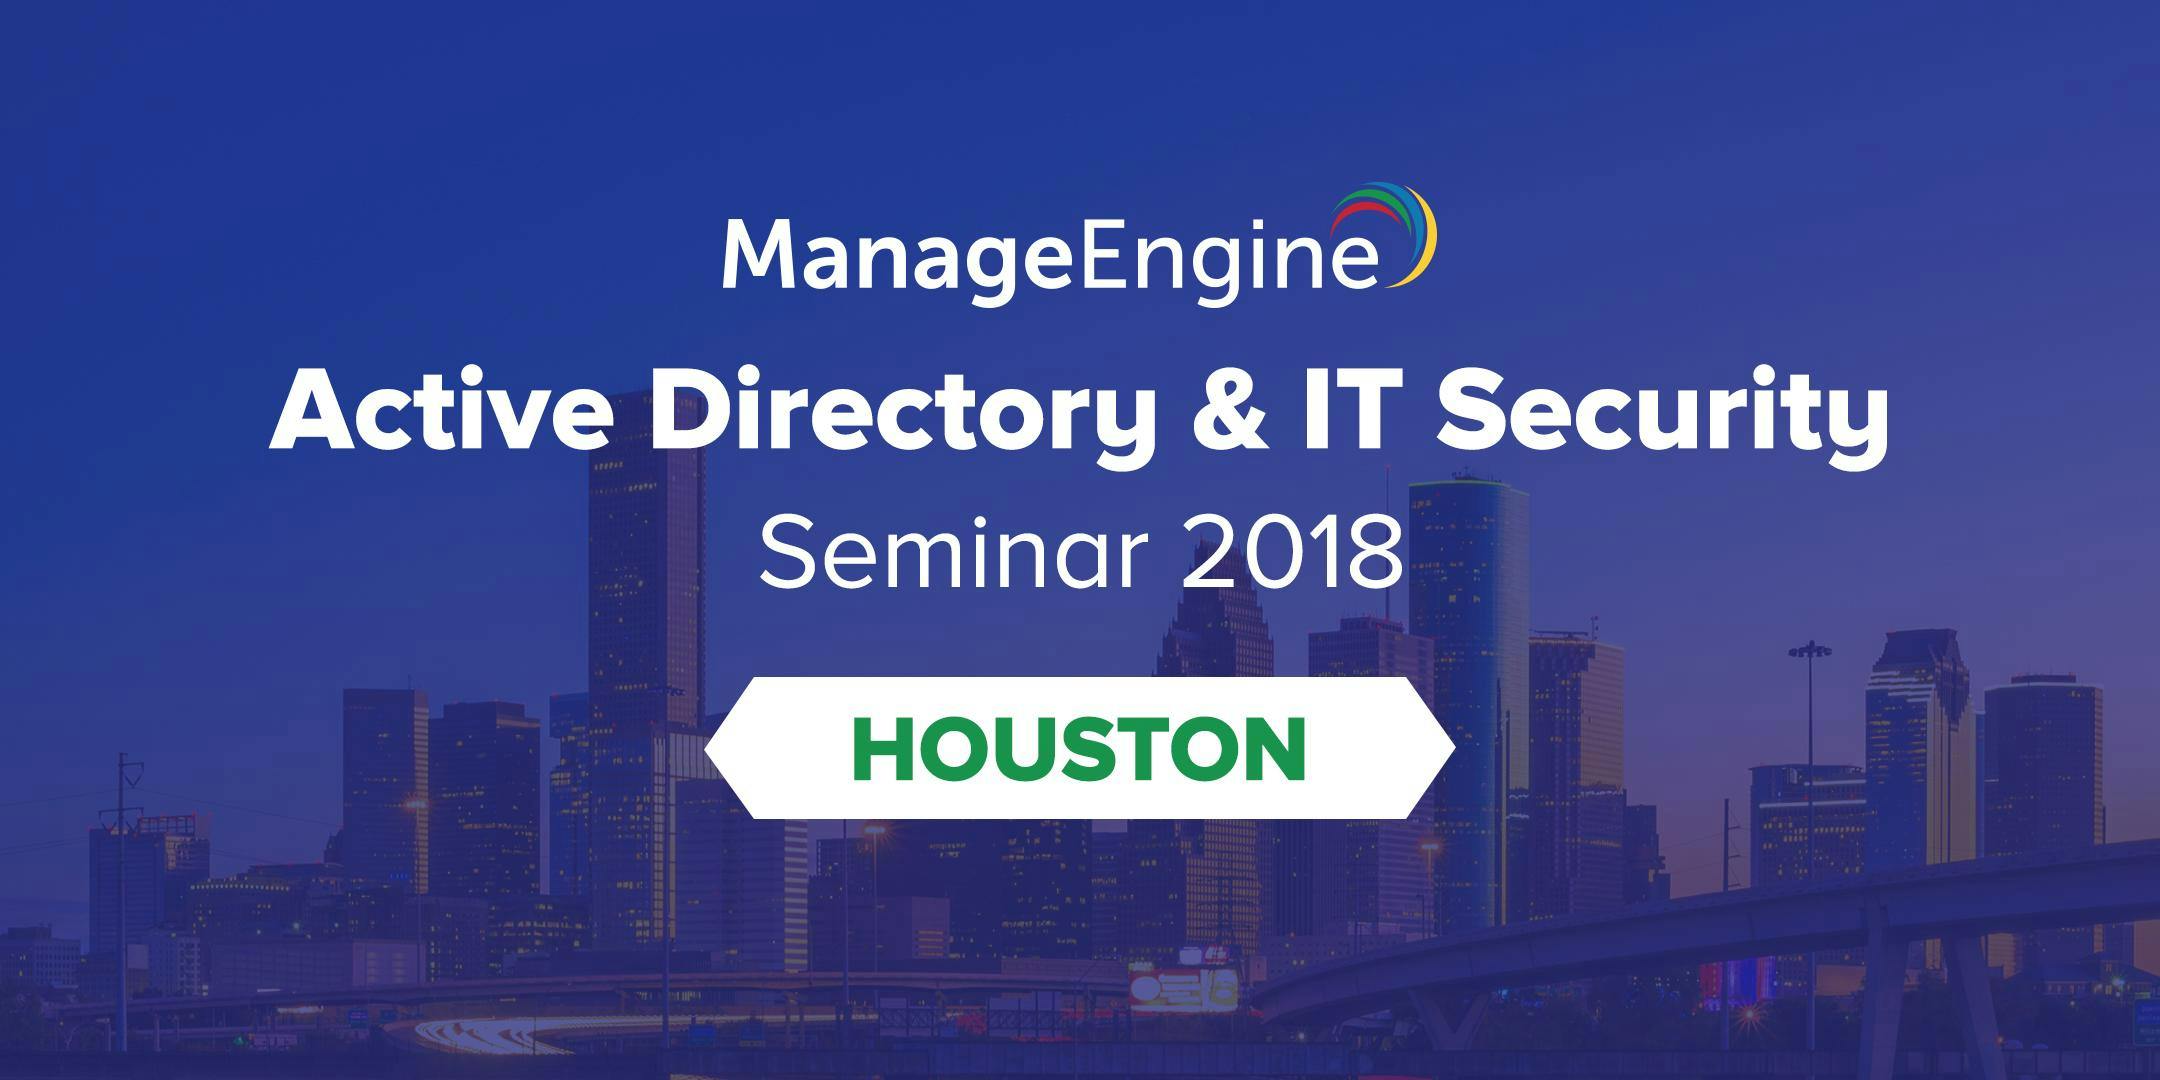  ManageEngine's Active Directory & IT Security seminar, Houston